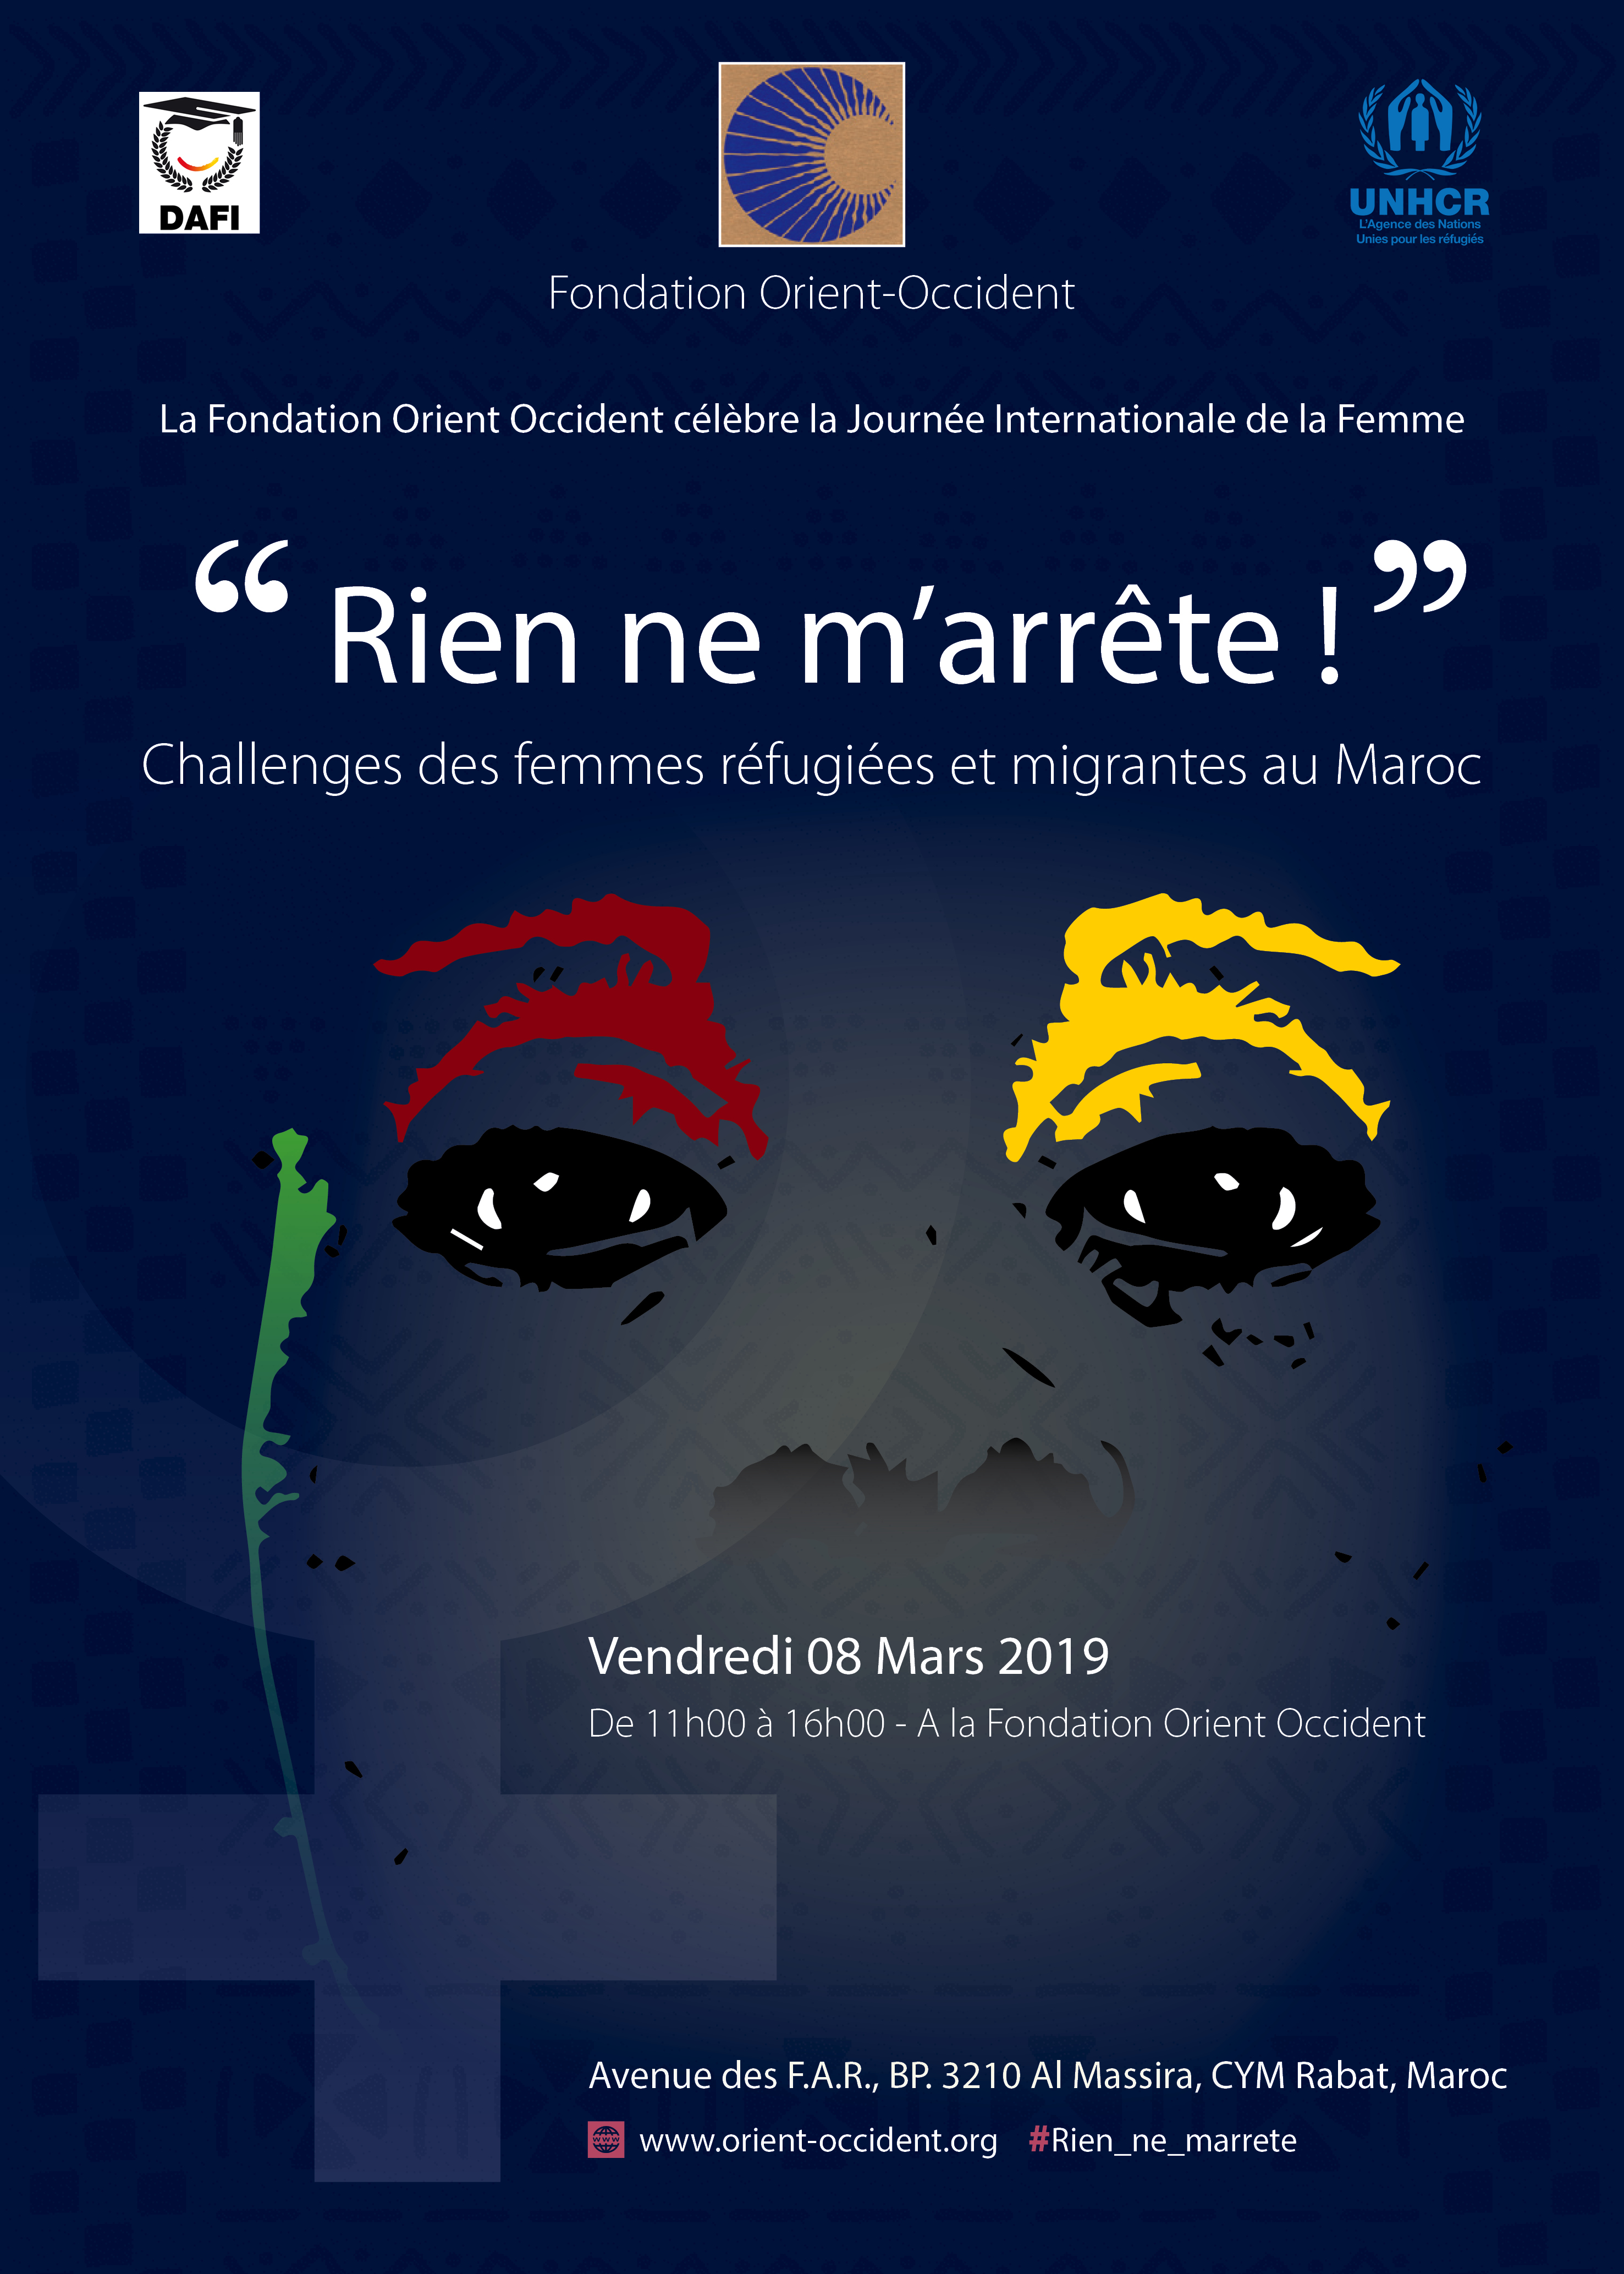 The Fondation Orient-Occident celebrates the International Women’s Day – Friday the 8th March 2019, from 11:00 to 16:00 – at the Fondation Orient-Occident of Rabat